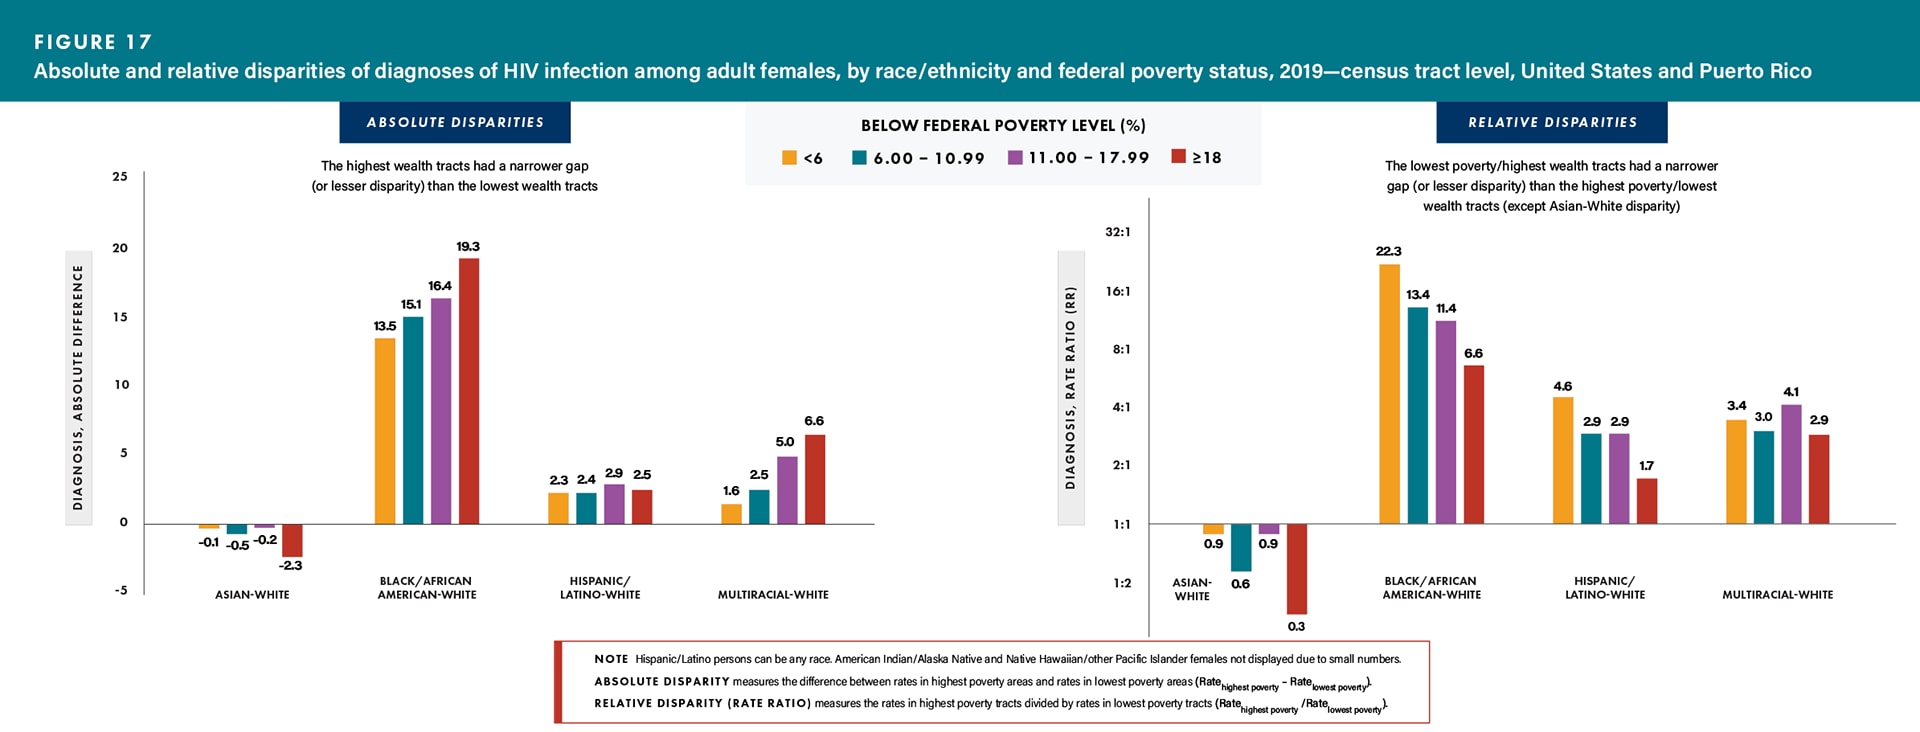 For absolute disparities, the lowest poverty/highest wealth tracts had a narrower gap (or lesser disparity) than the highest poverty/lowest wealth tracts. For relative disparities, the lowest poverty/highest wealth tracts had a wider gap (or greater disparity) than the highest poverty/lowest wealth tracts (except Asian-White disparity).